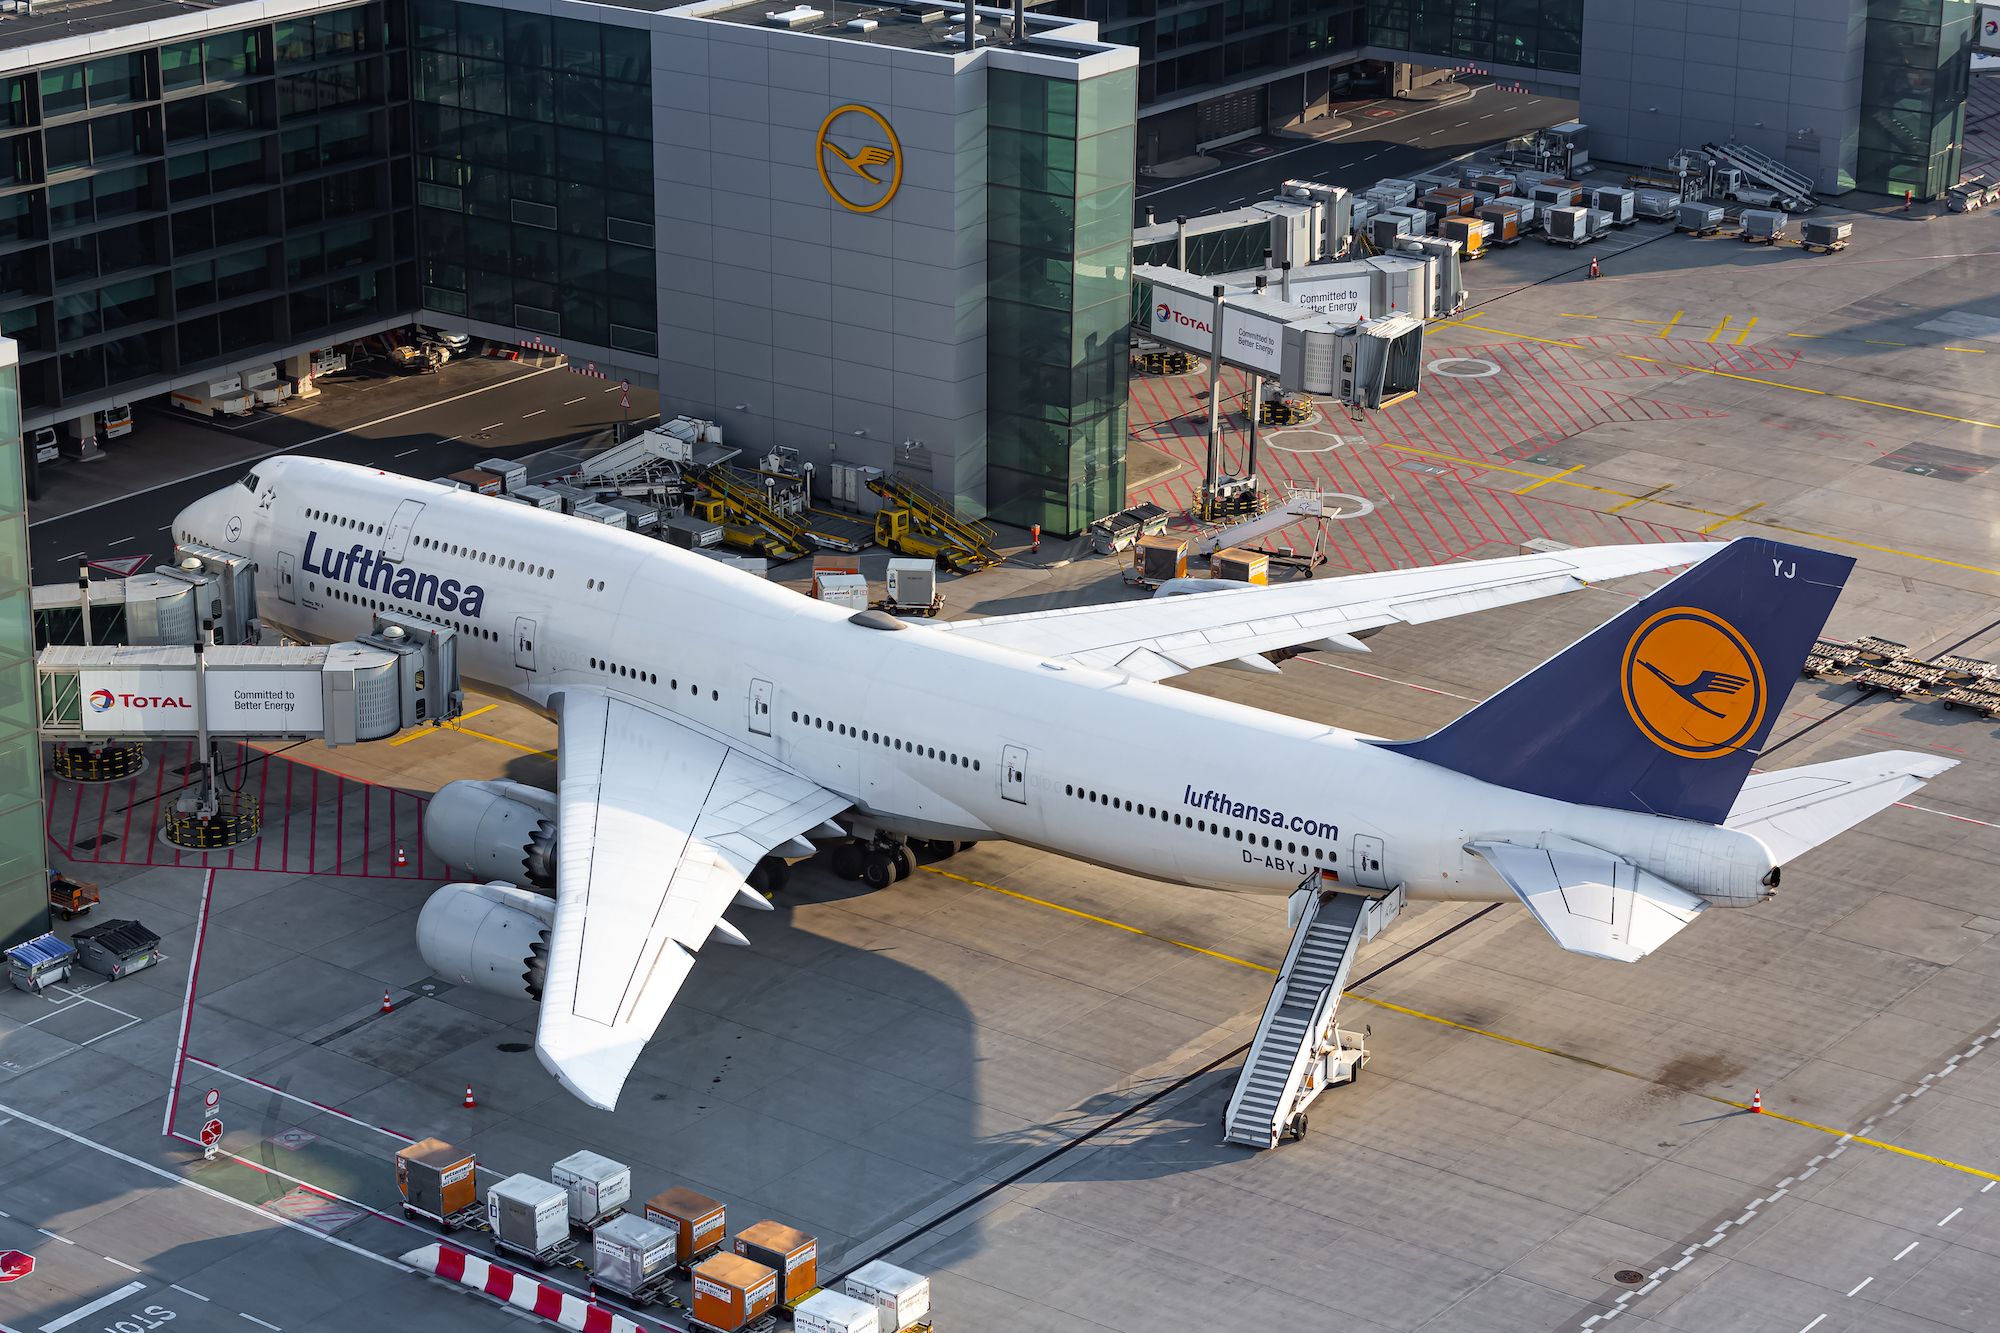 Lufthansa Boeing 747-8 parked at the gate at Frankfurt Airport.